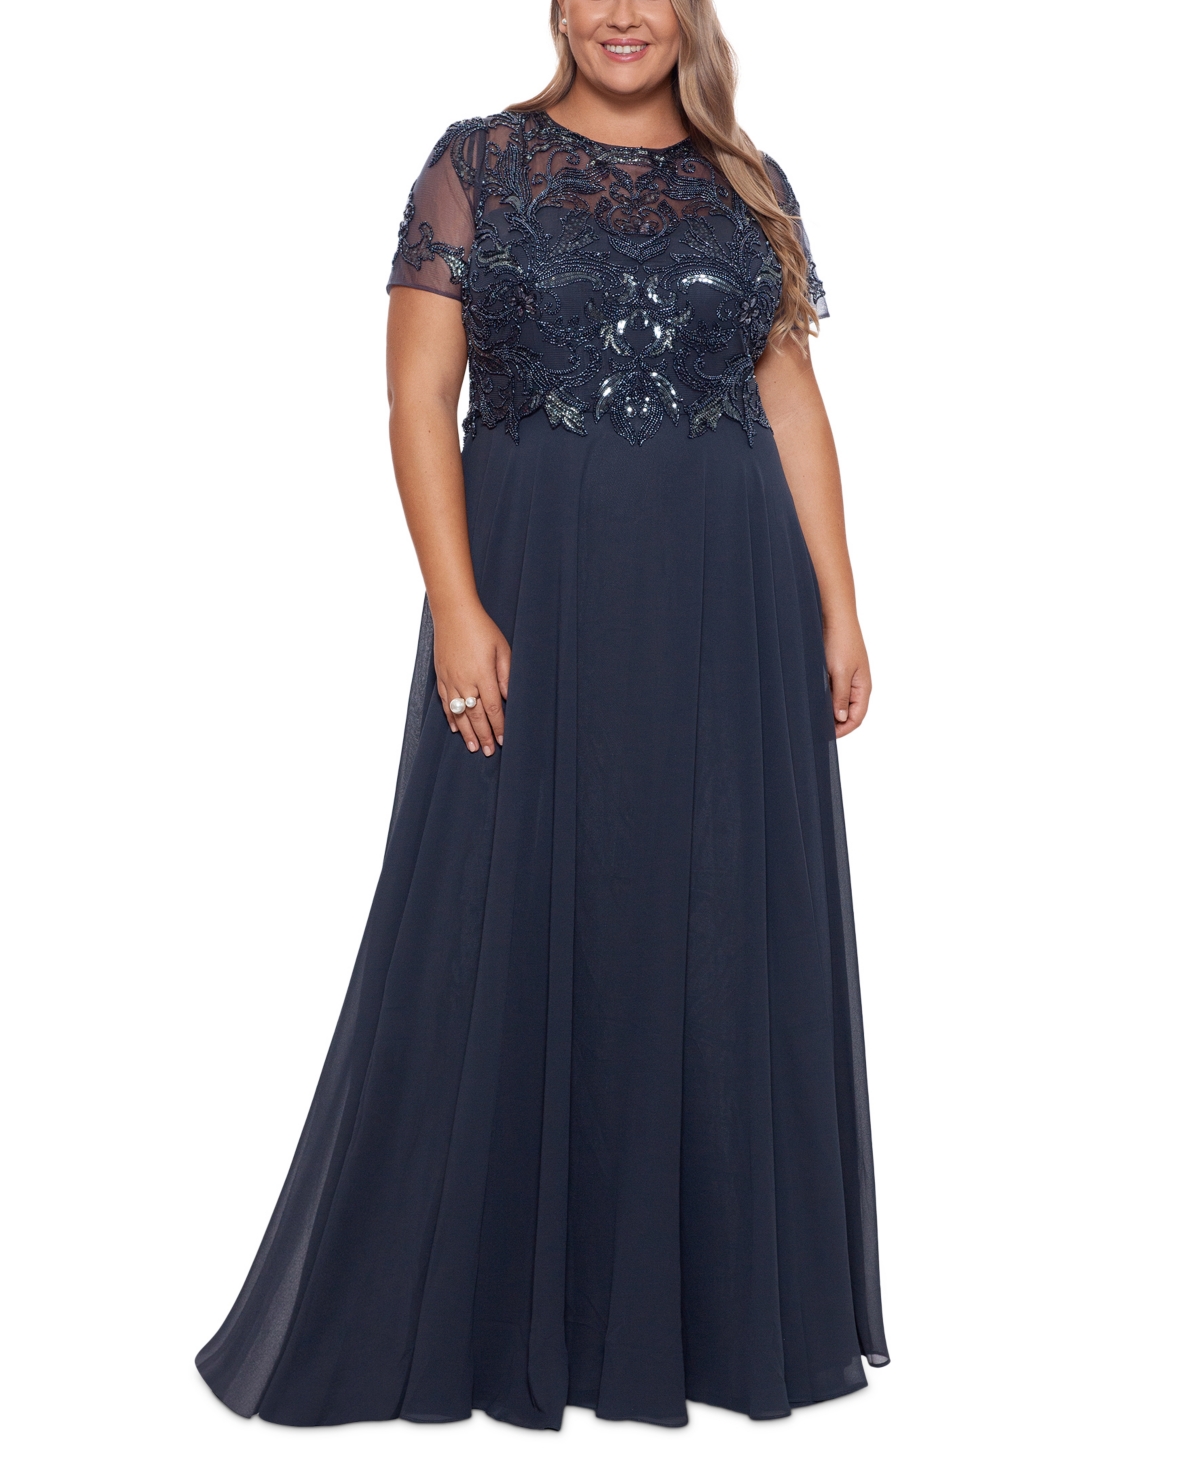 Plus Size Embellished Chiffon Ball Gown - Charcoal